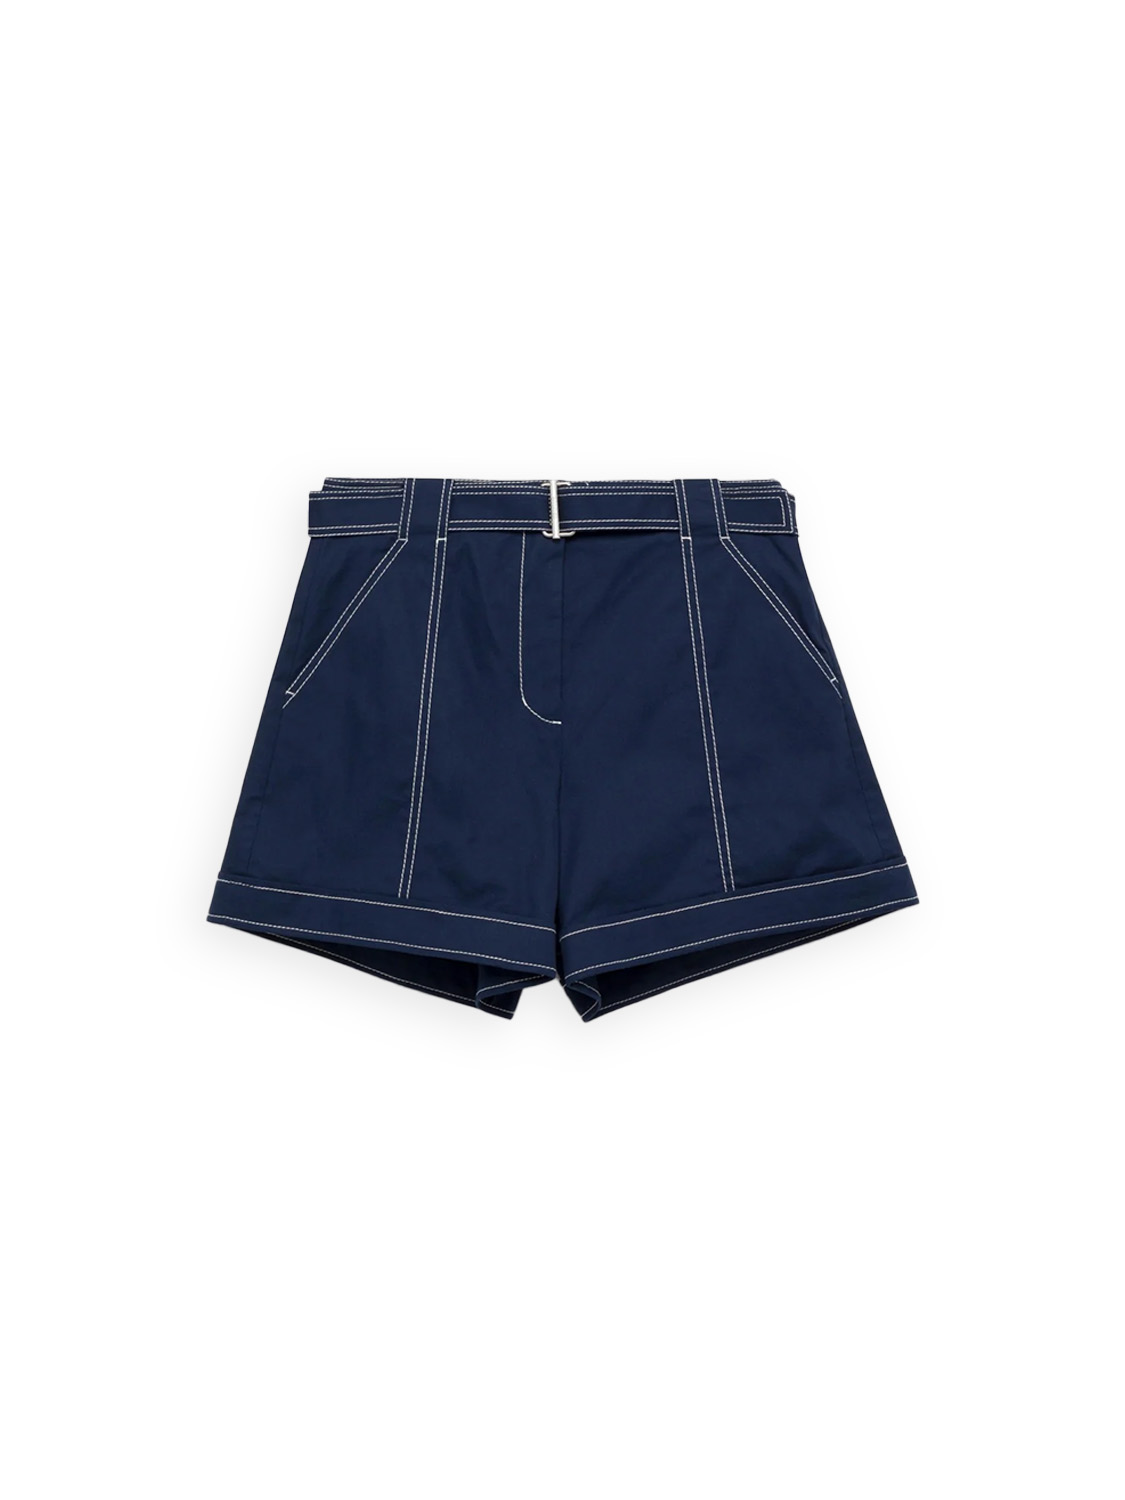 Simkhai Lourie – shorts with white sewing detail  blue 36